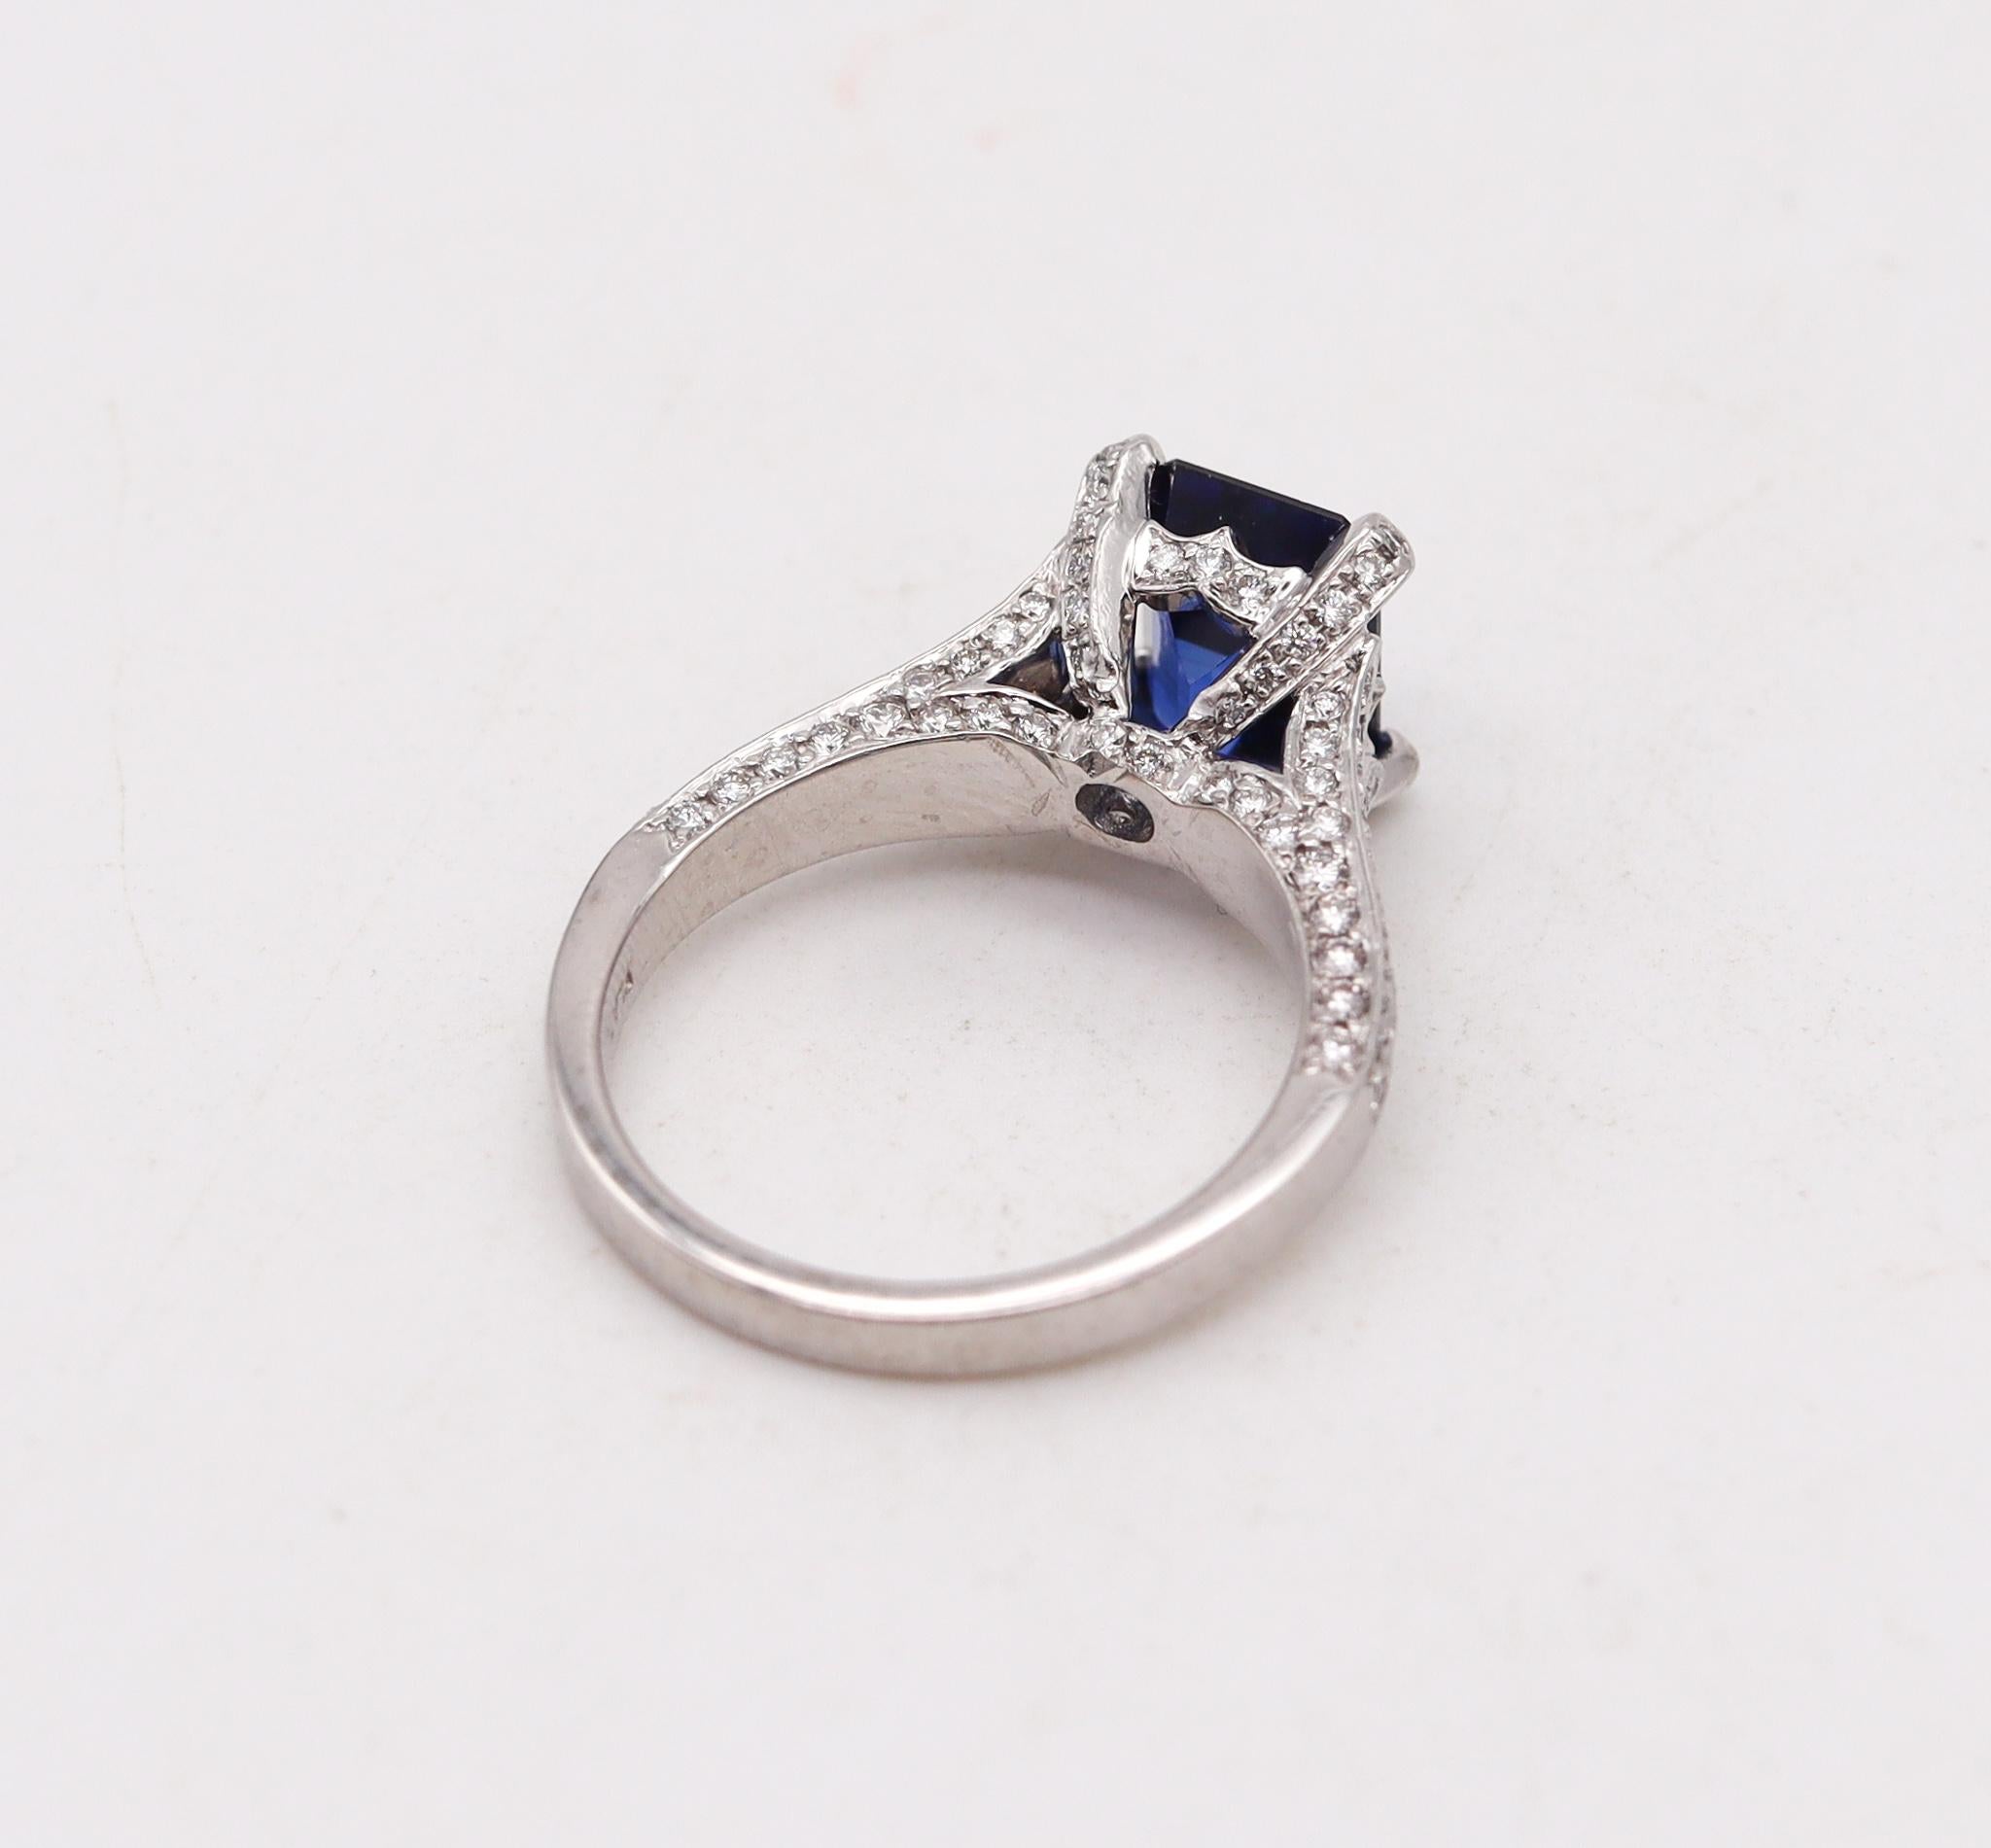 Women's Charles Krypell Modern Ring in Platinum with 4.91 Ctw in Diamonds and Tanzanite For Sale